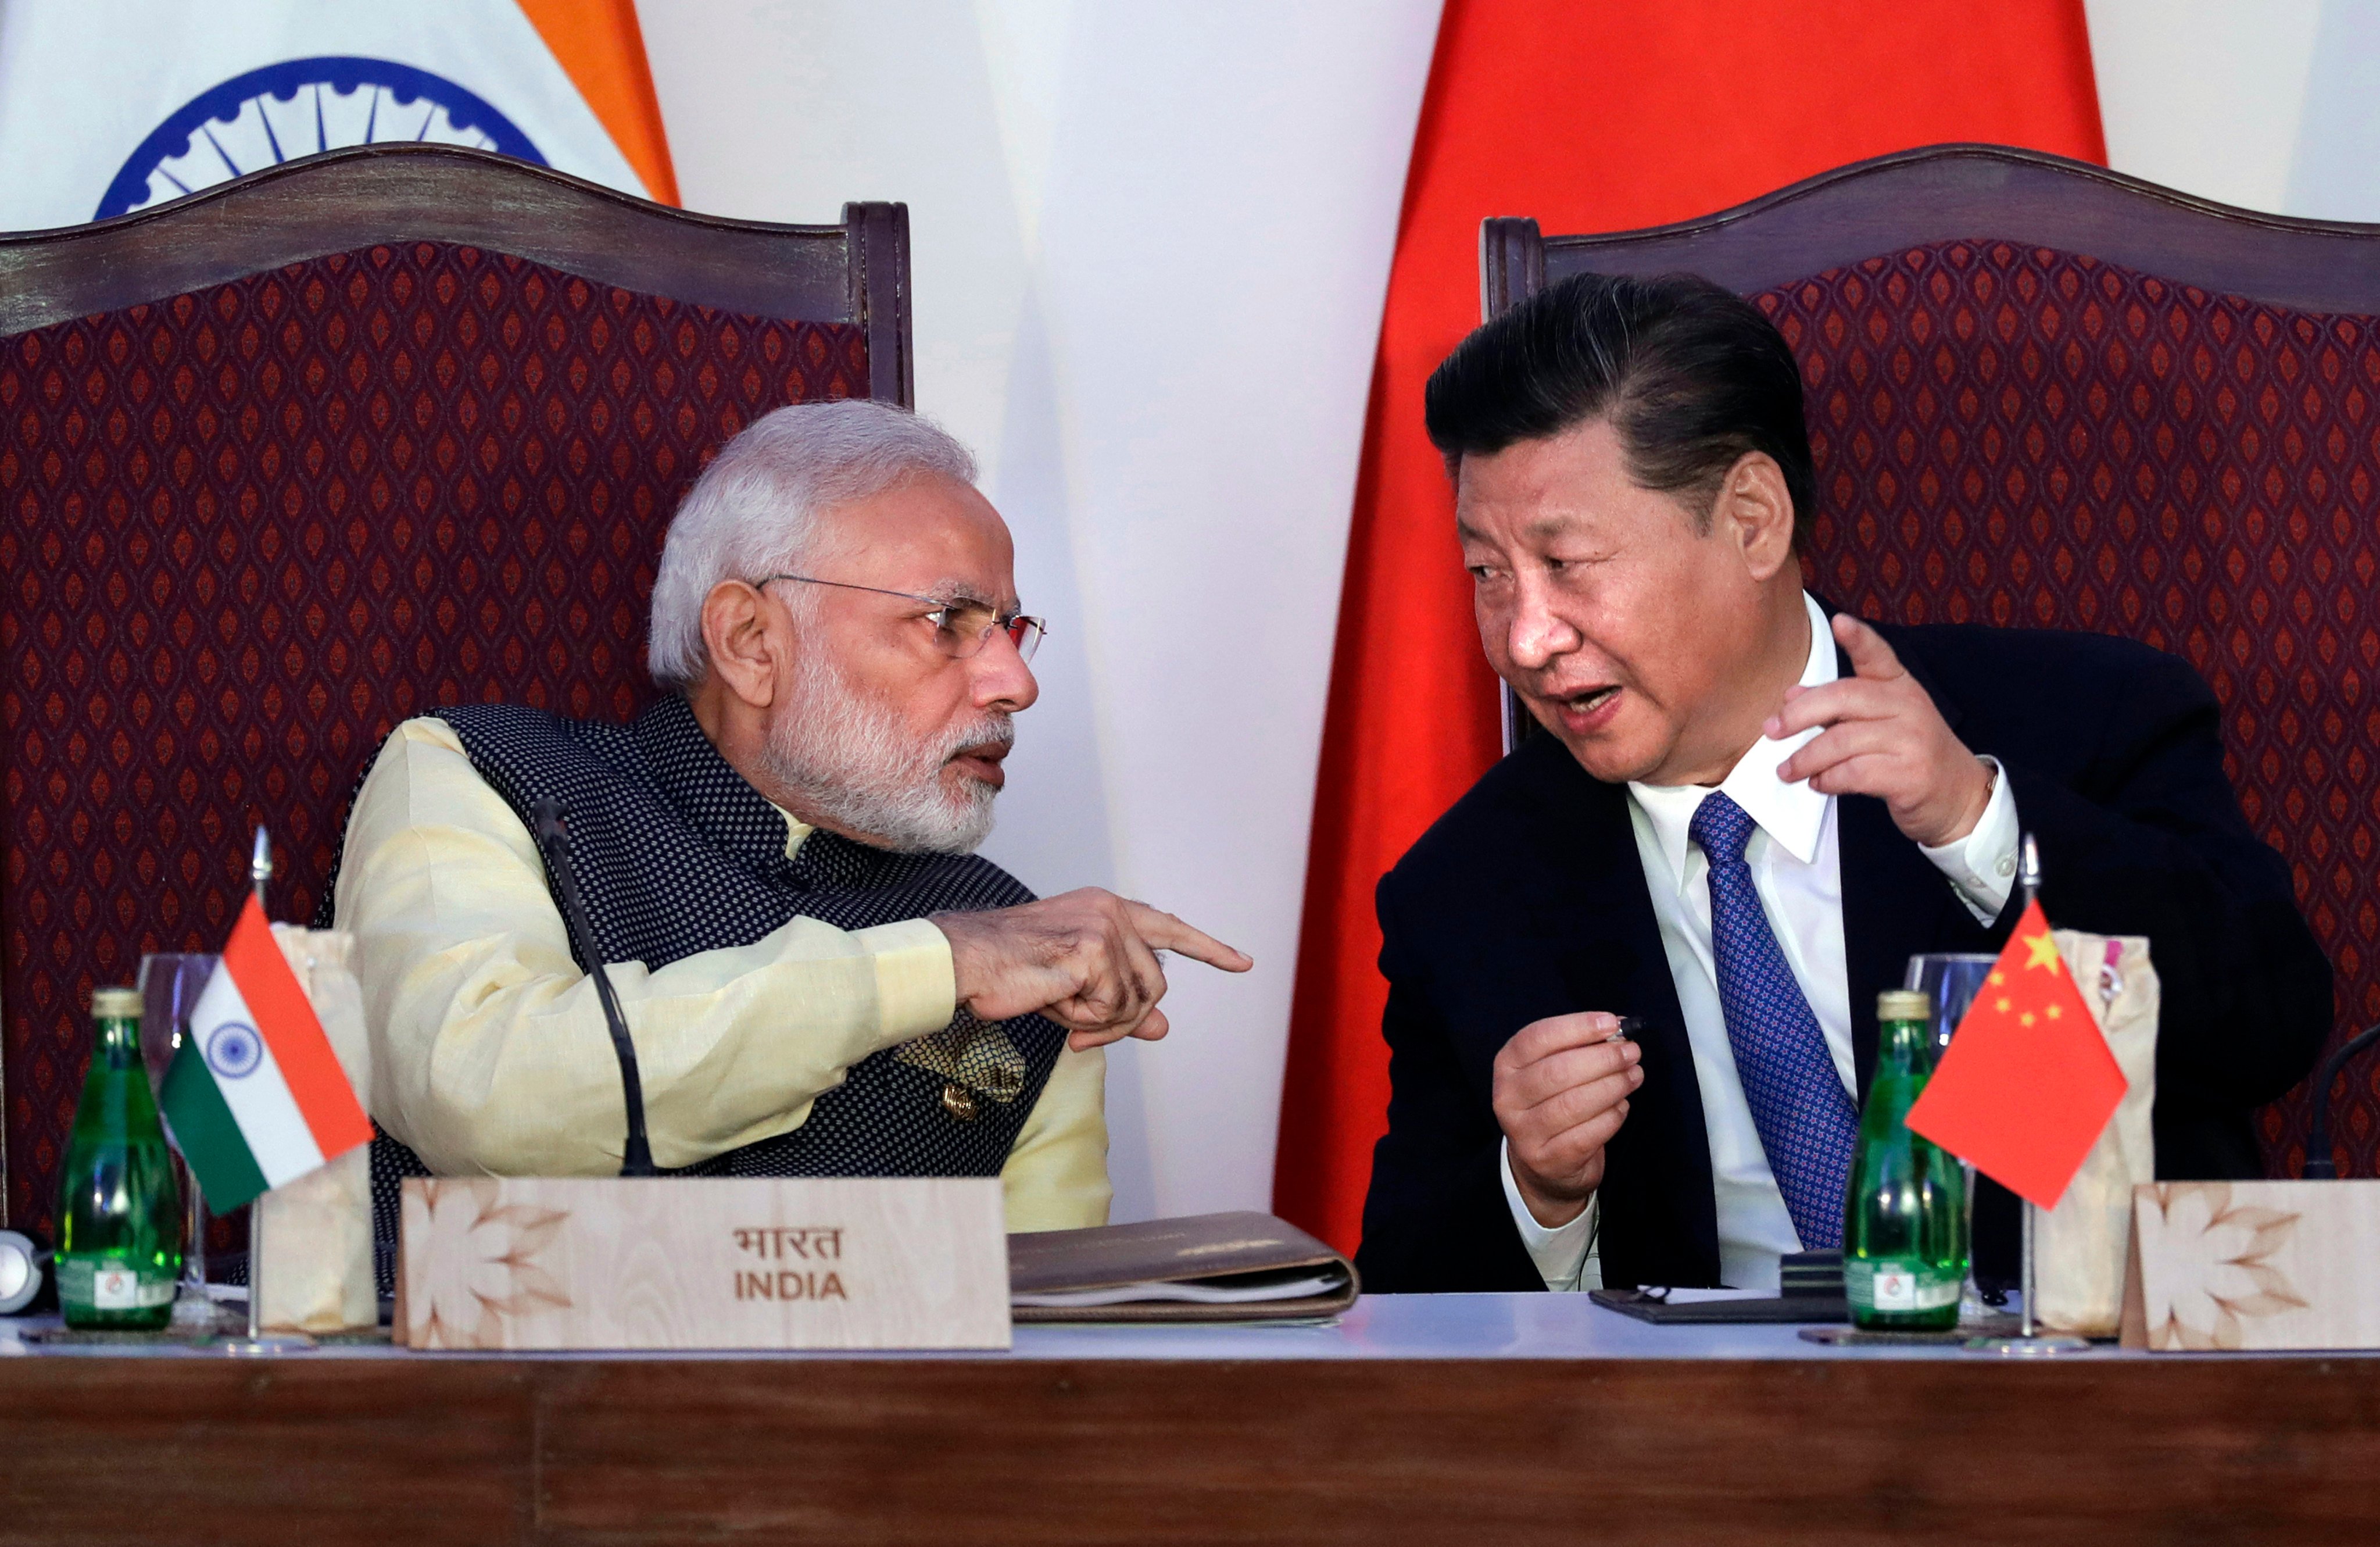 Indian Prime Minister Narendra Modi, left, talks with Chinese President Xi Jinping at a signing ceremony by foreign ministers during the BRICS summit in Goa, India, in 2016. Photo: AP